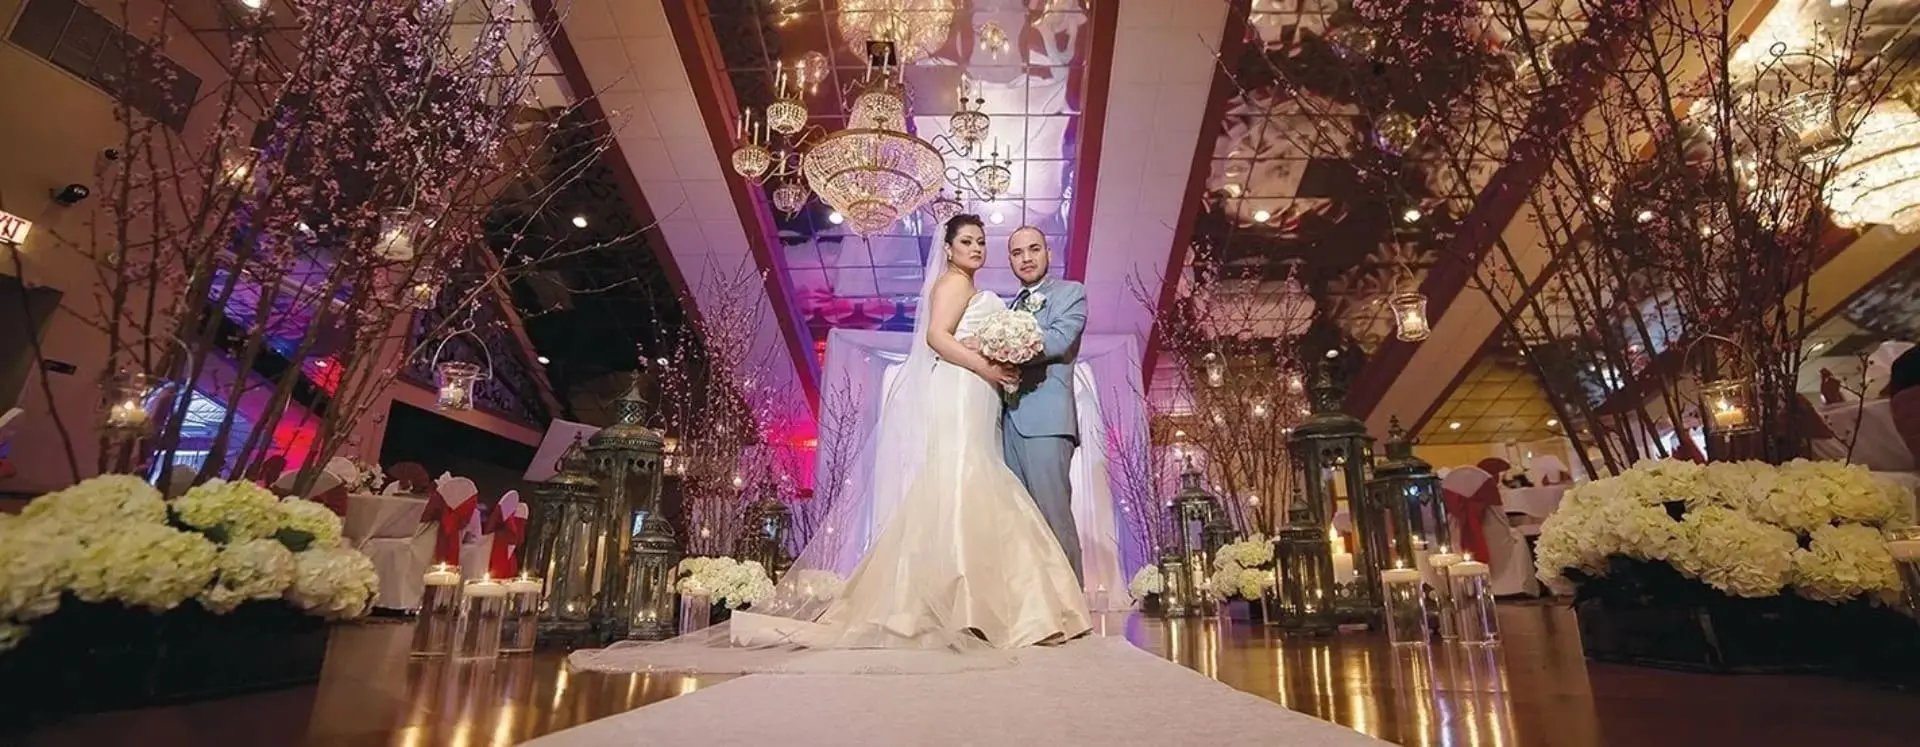 A bride and groom pose for the camera in front of a mirror.